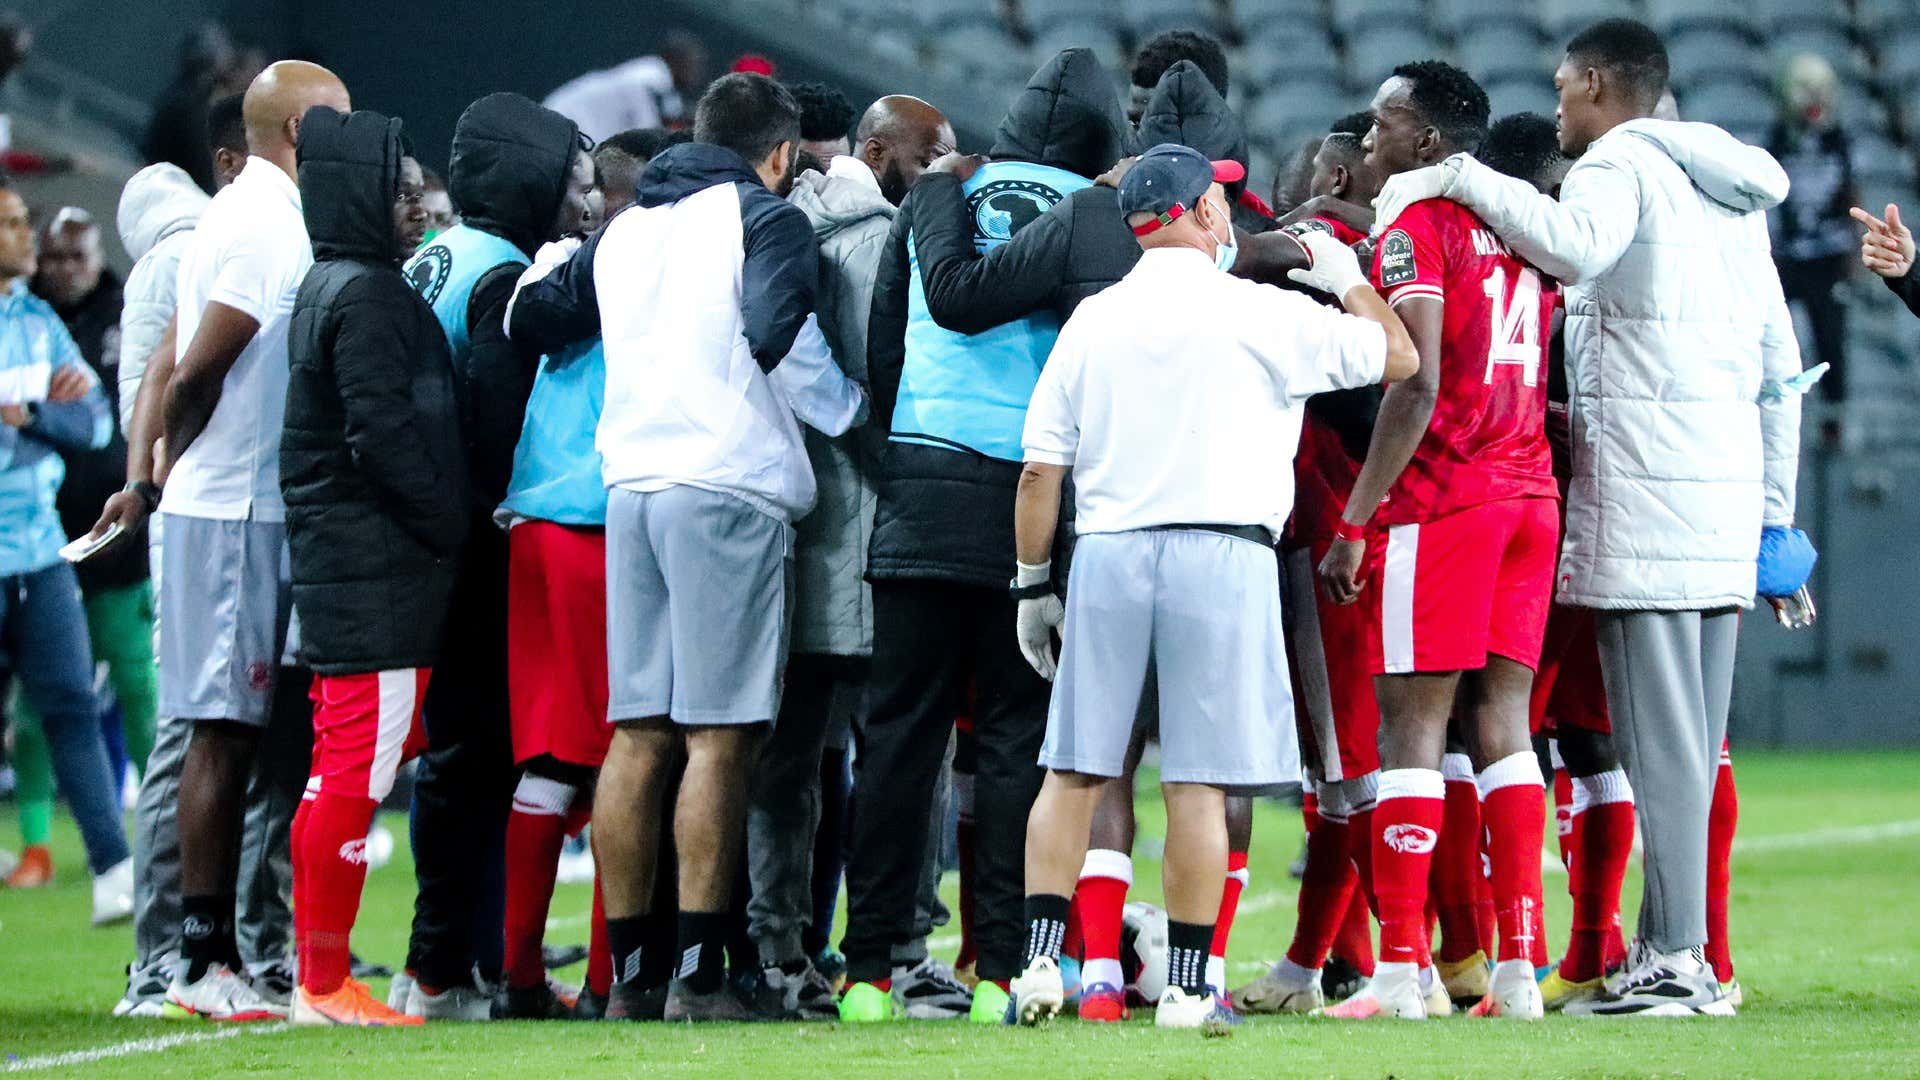 Simba SC fined after performing ritual against Orlando Pirates in Caf Confederation Cup